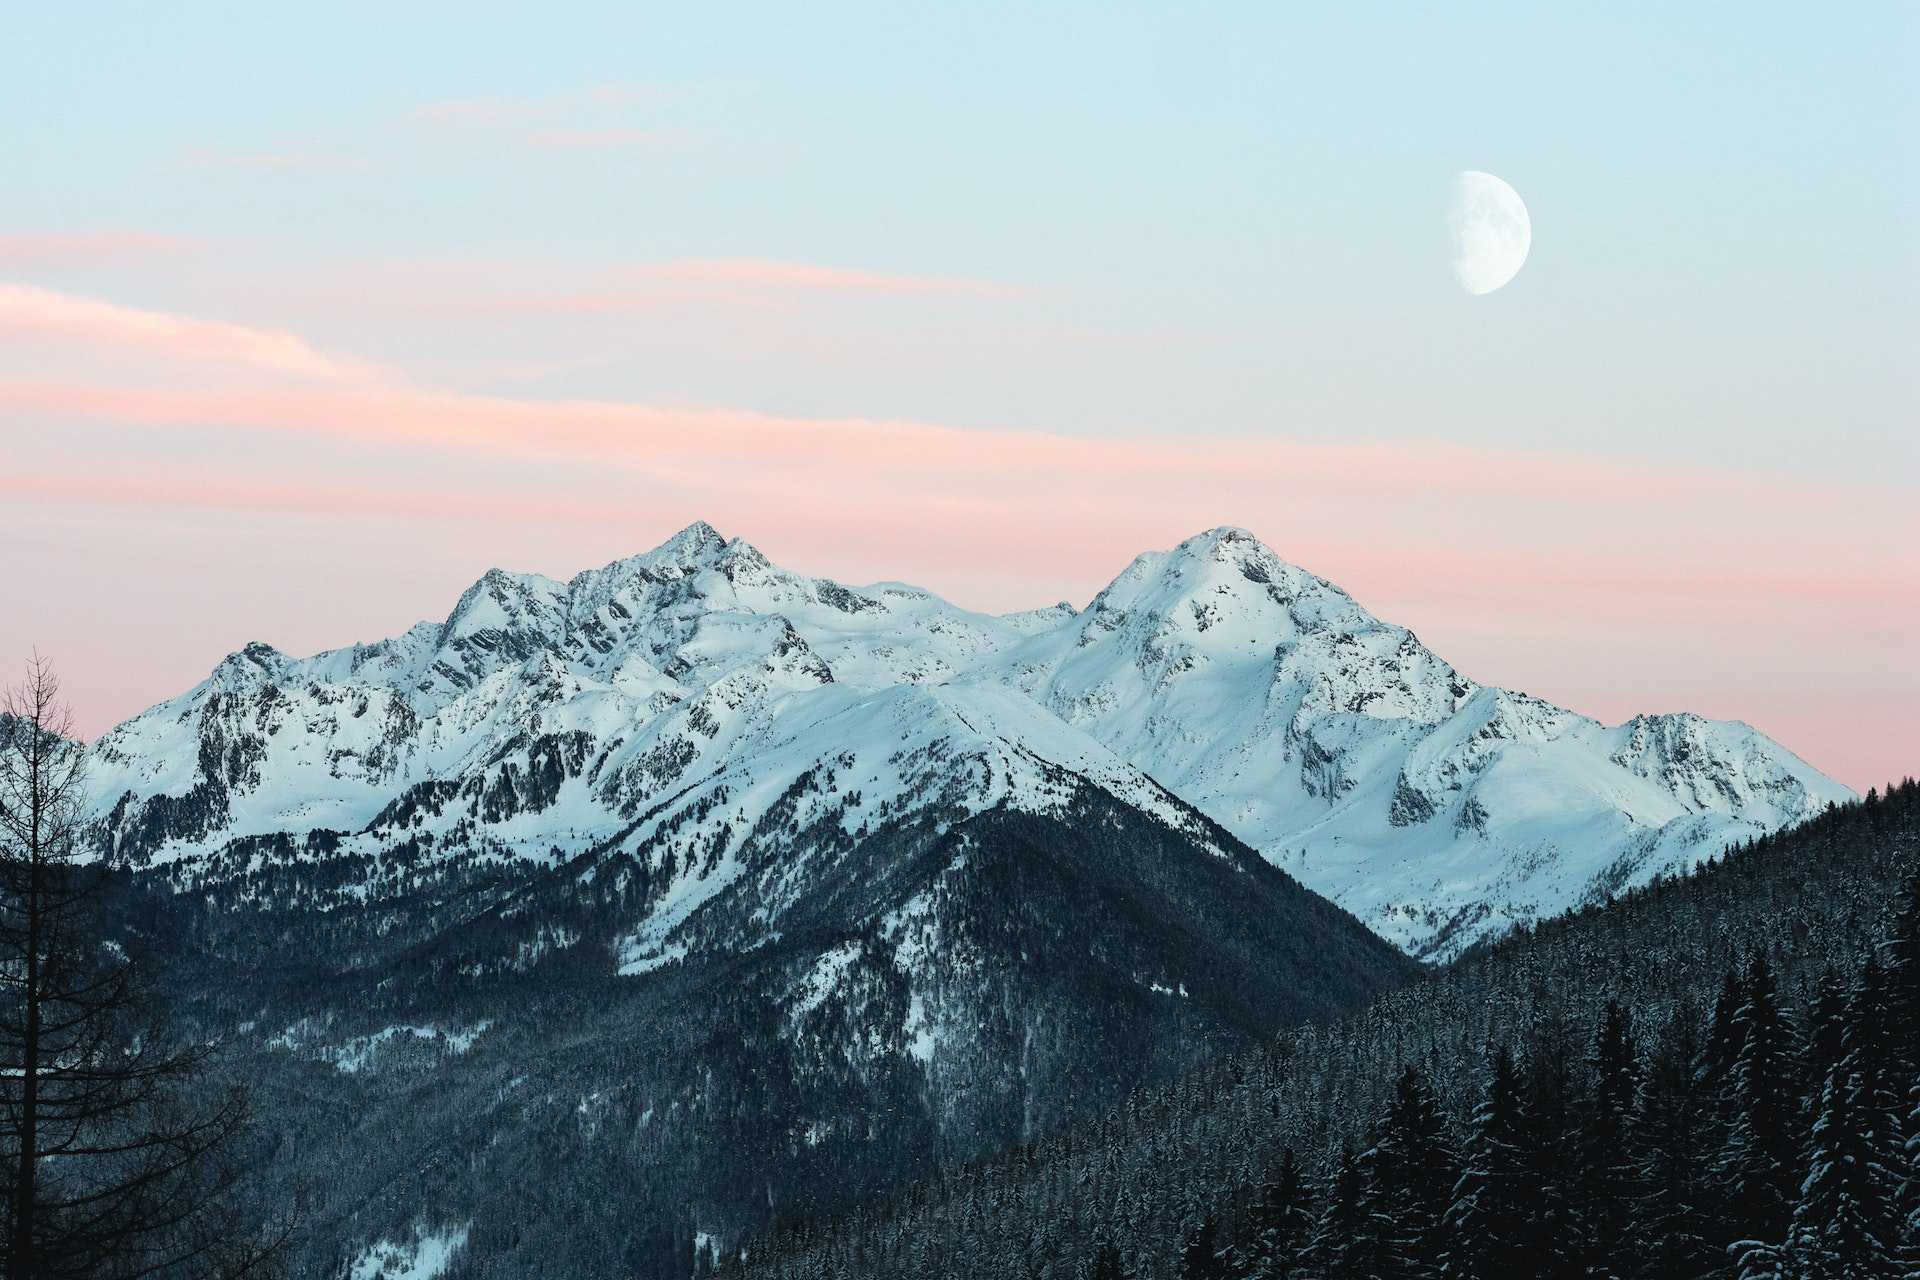 Snow capped mountain range at early sunset with the moon visible